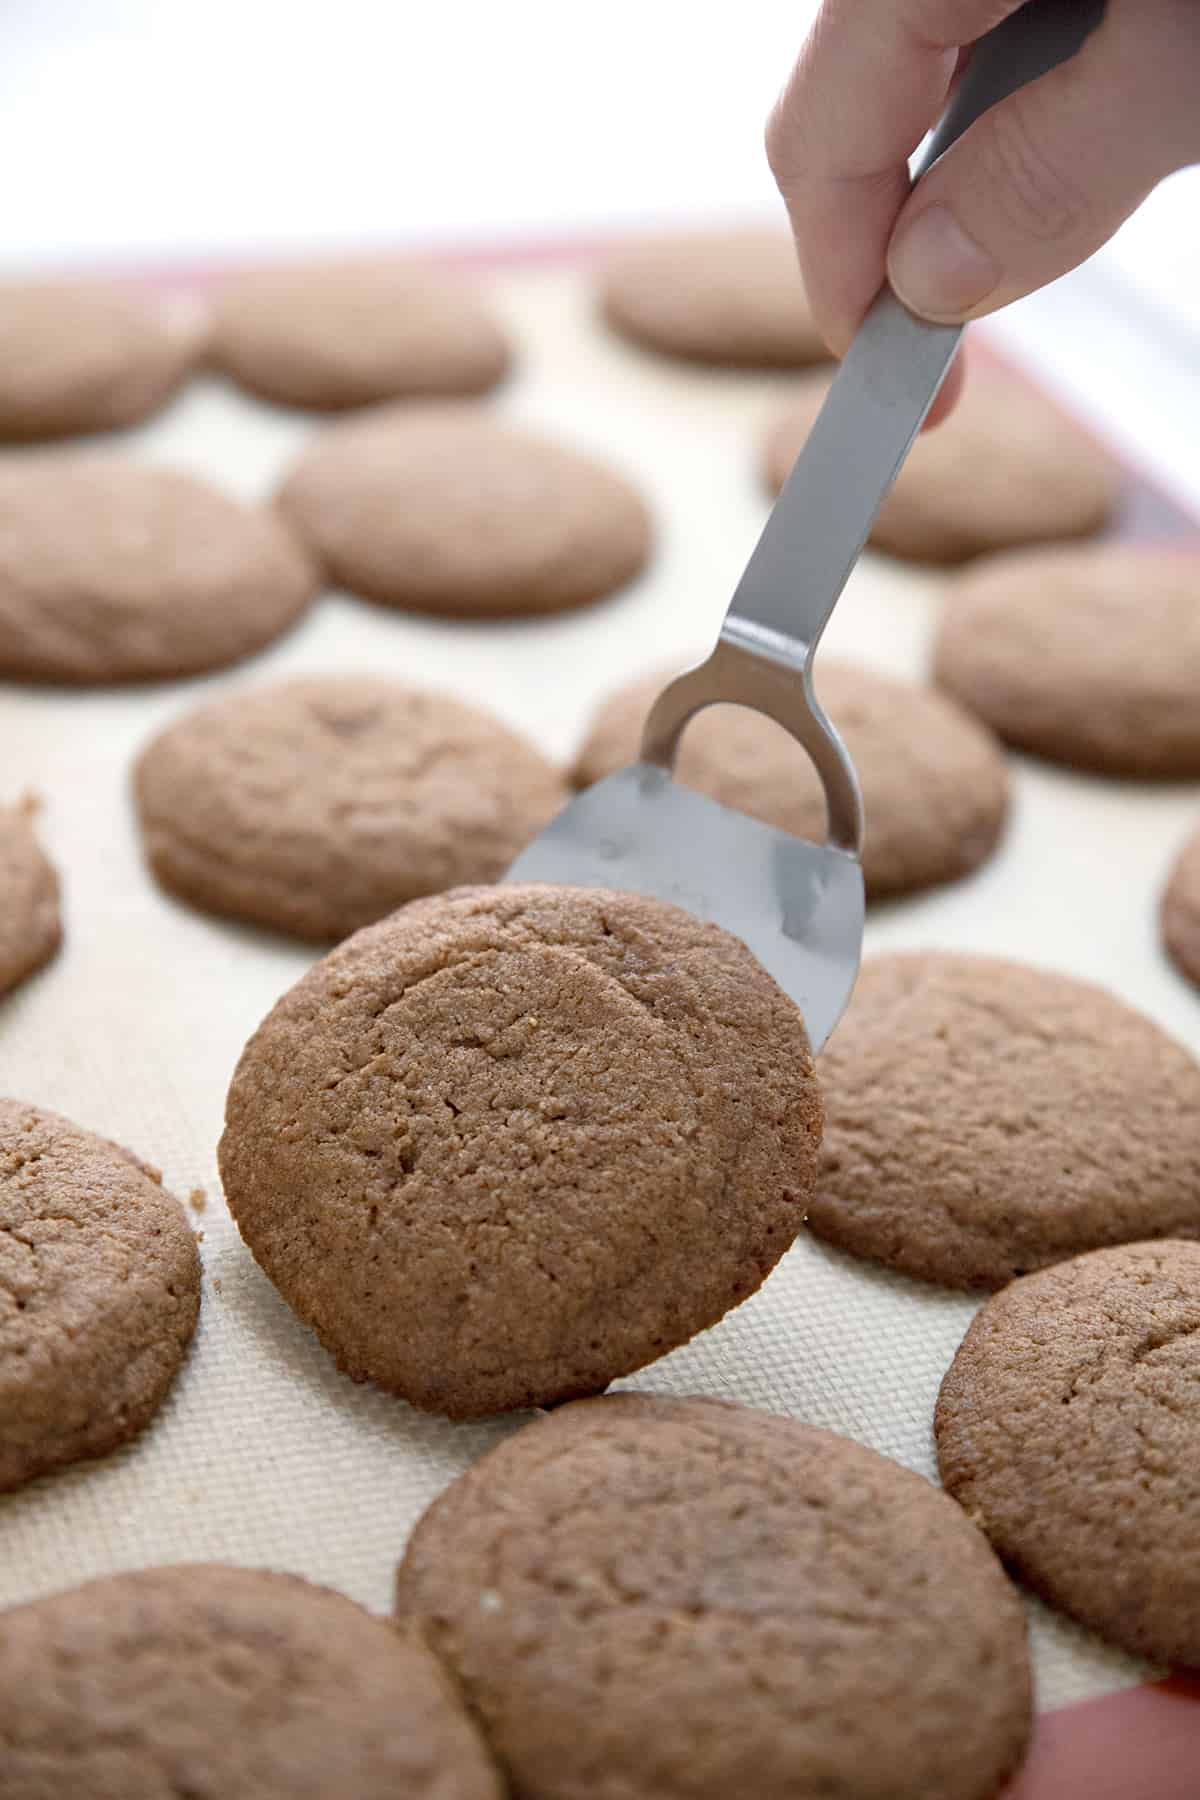 A spatula lifting a keto ginger cookie off the baking tray.